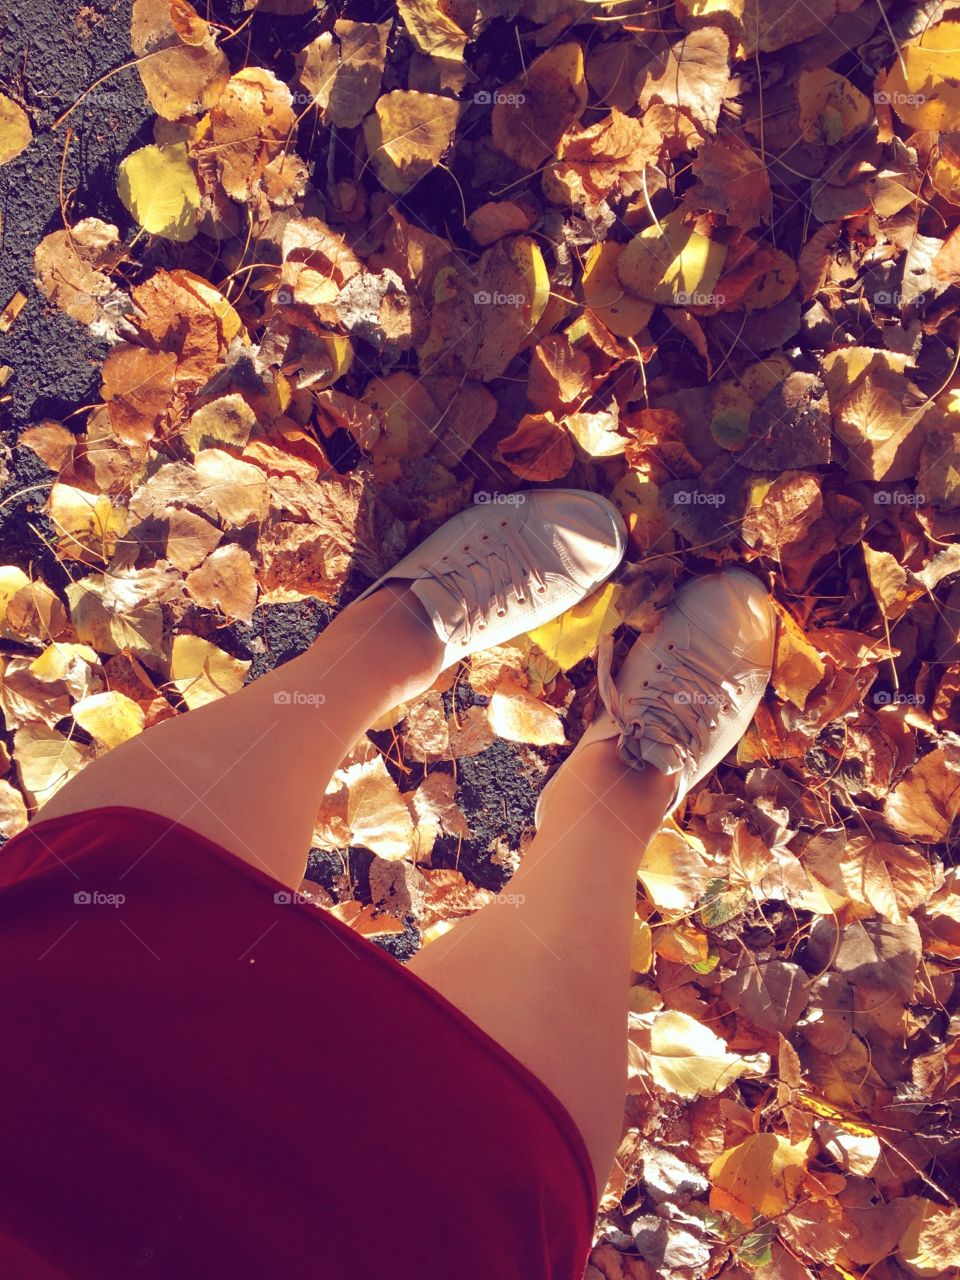 Feet crunching in colourful autumn leaves